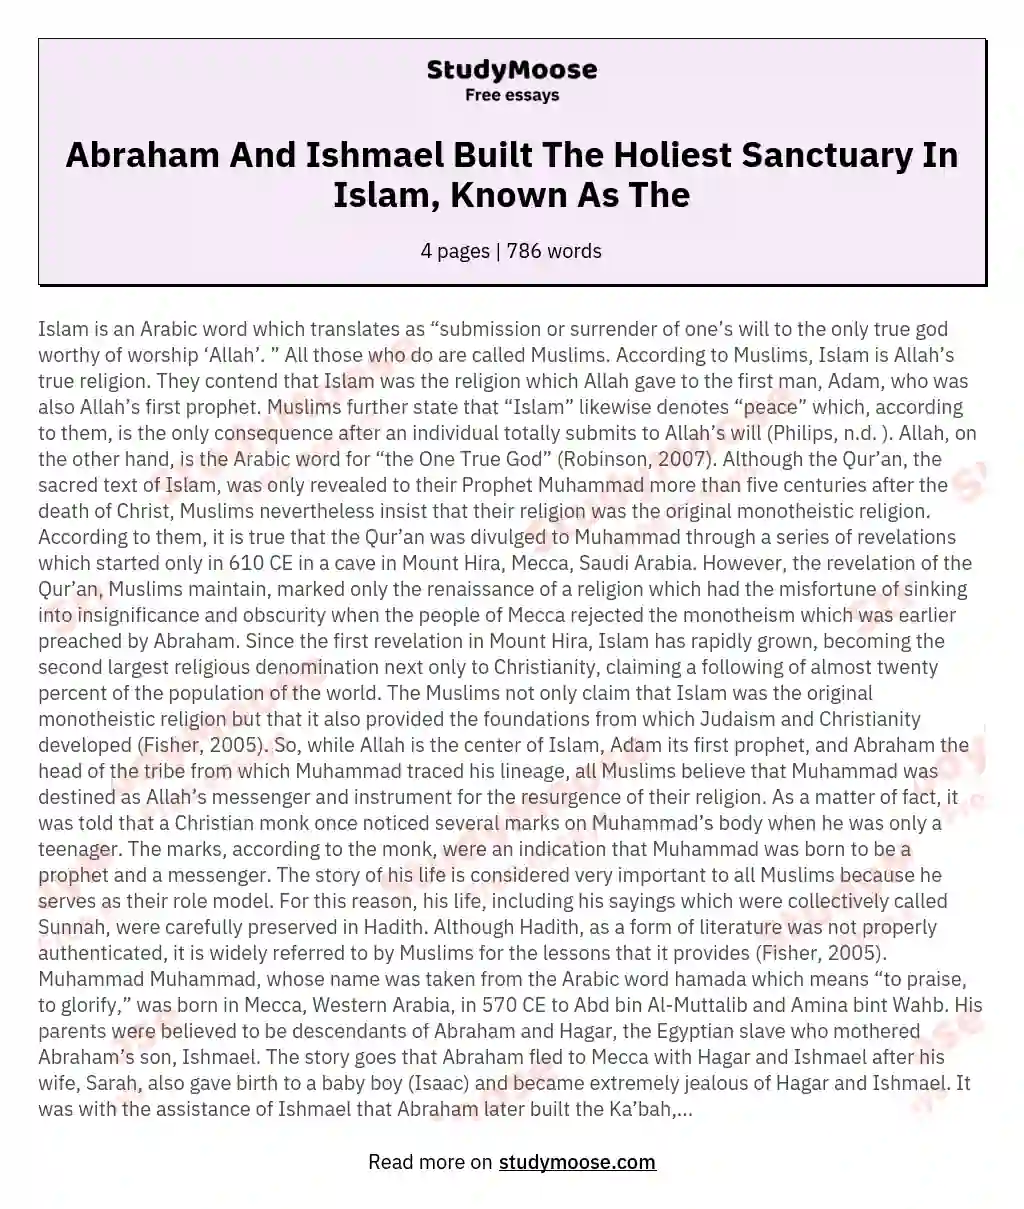 Abraham And Ishmael Built The Holiest Sanctuary In Islam, Known As The essay